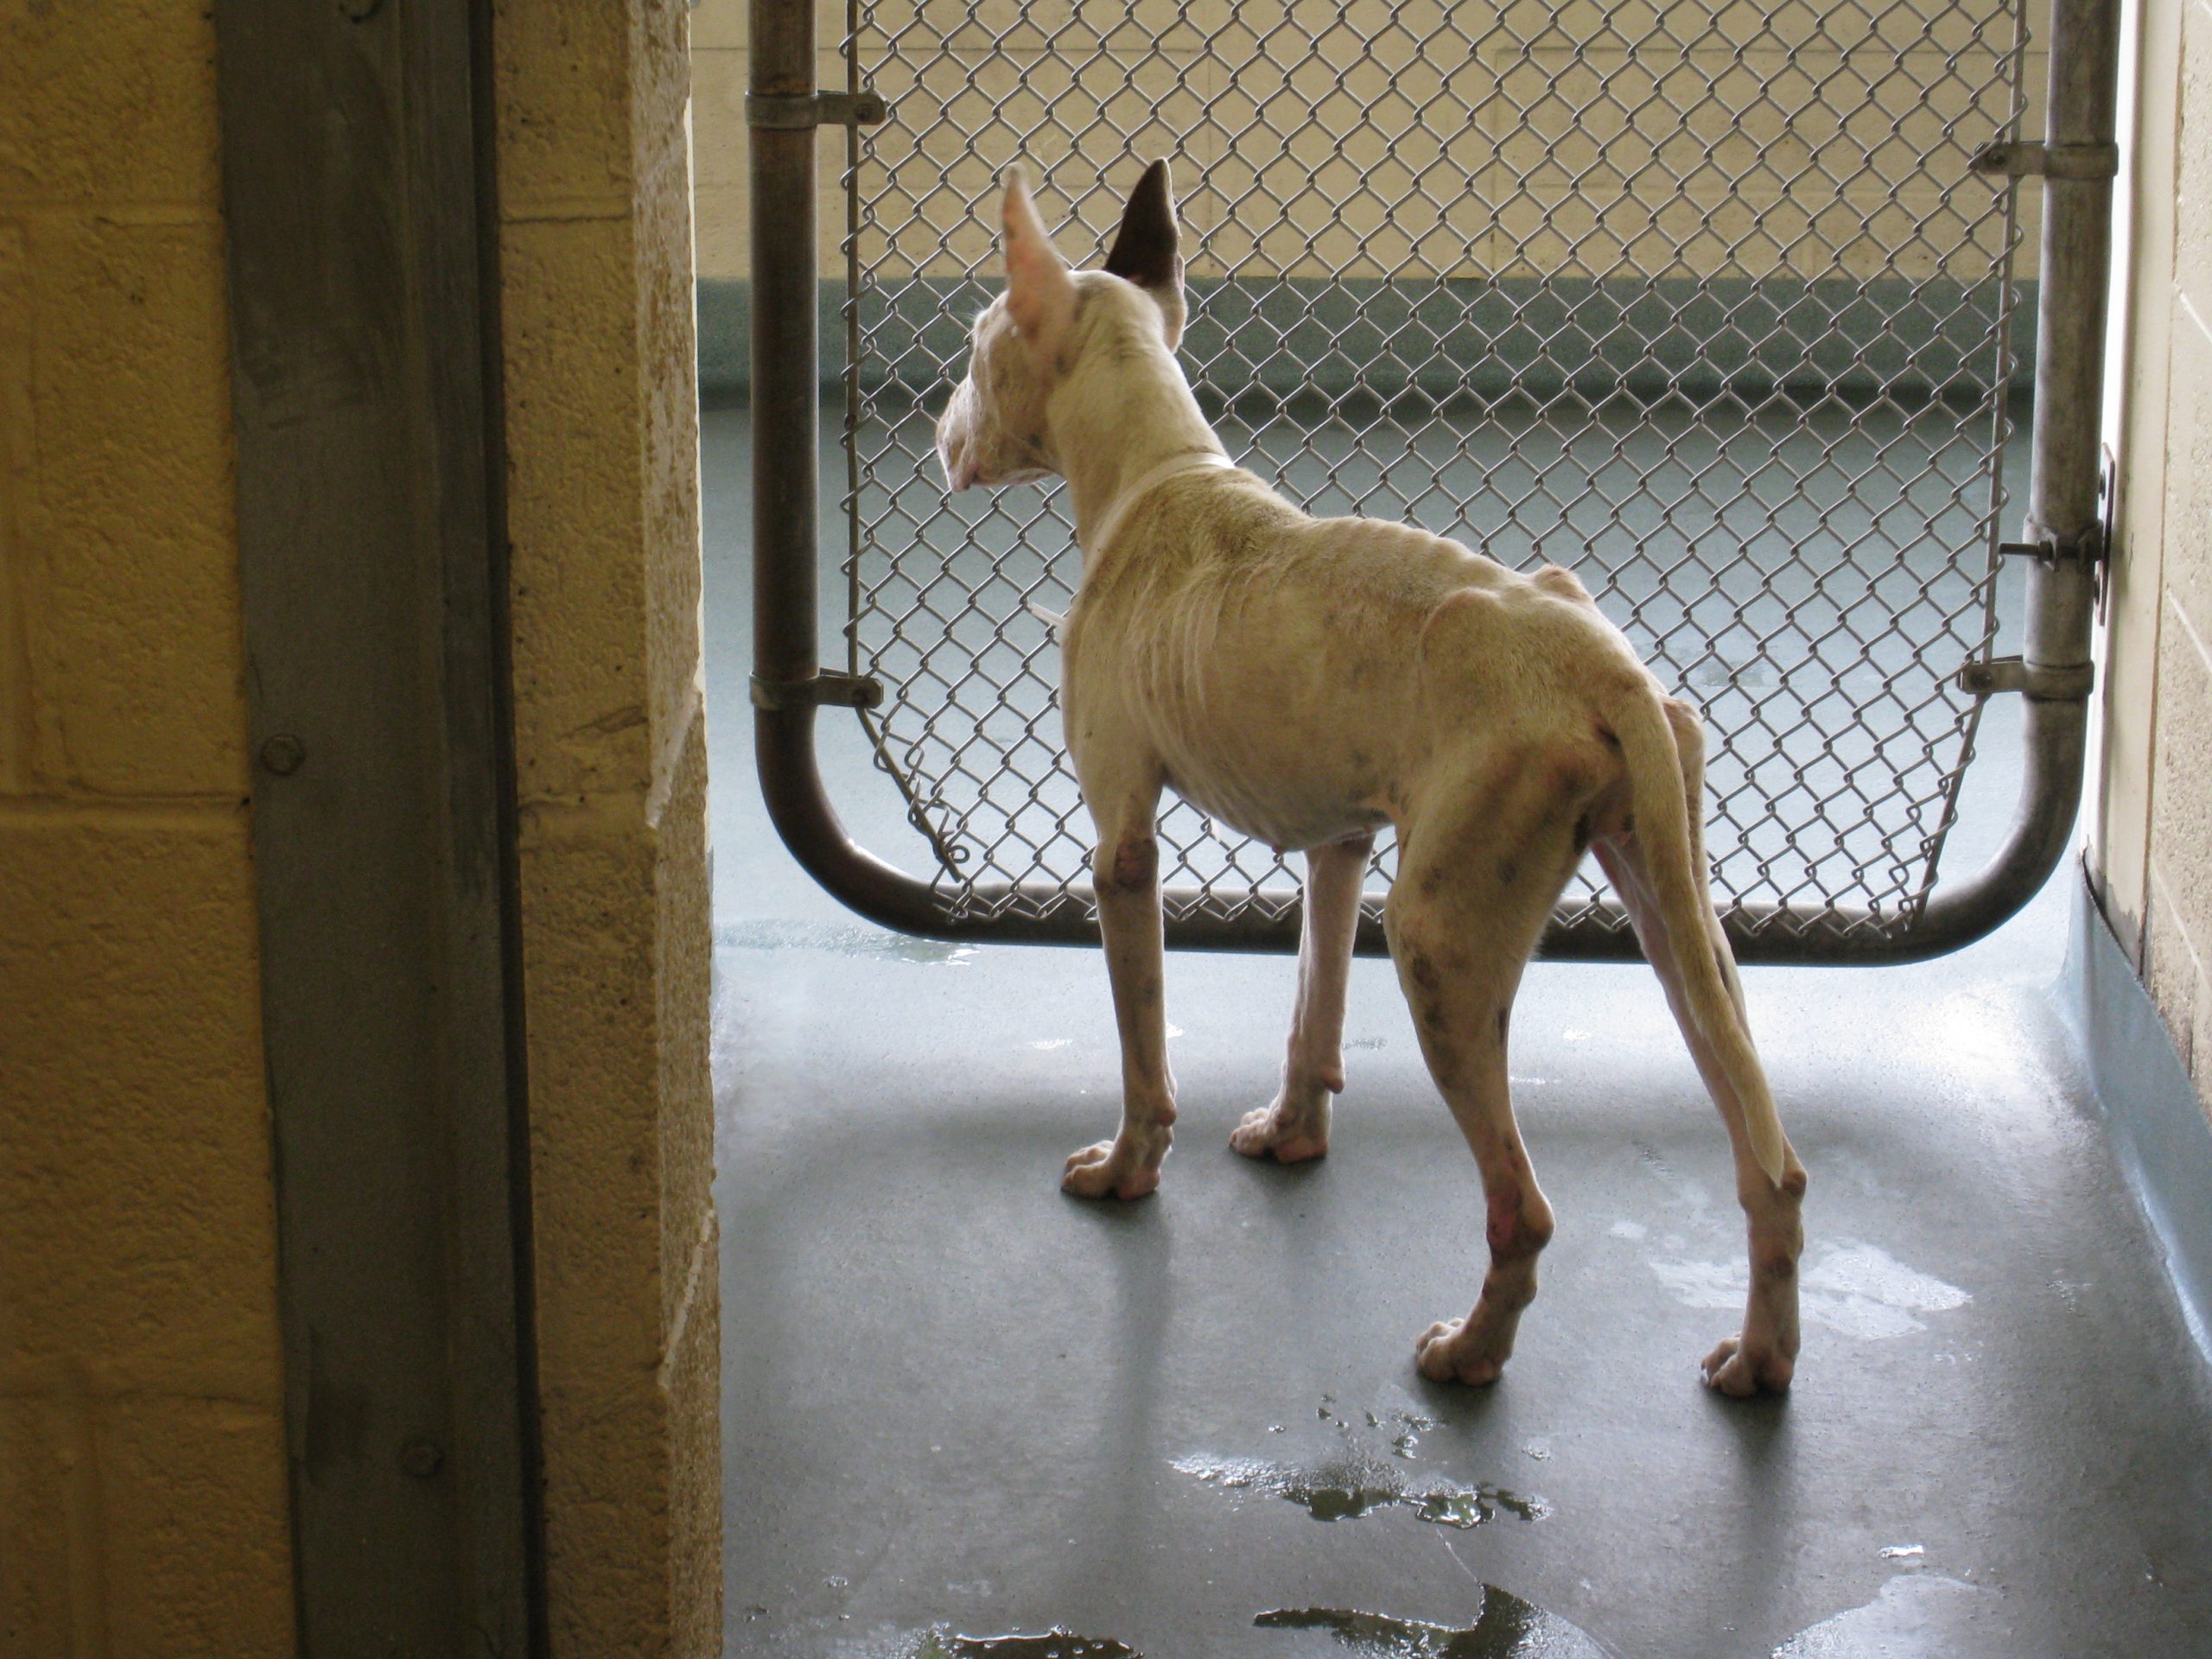 An emaciated white dog looks out of a shelter kennel